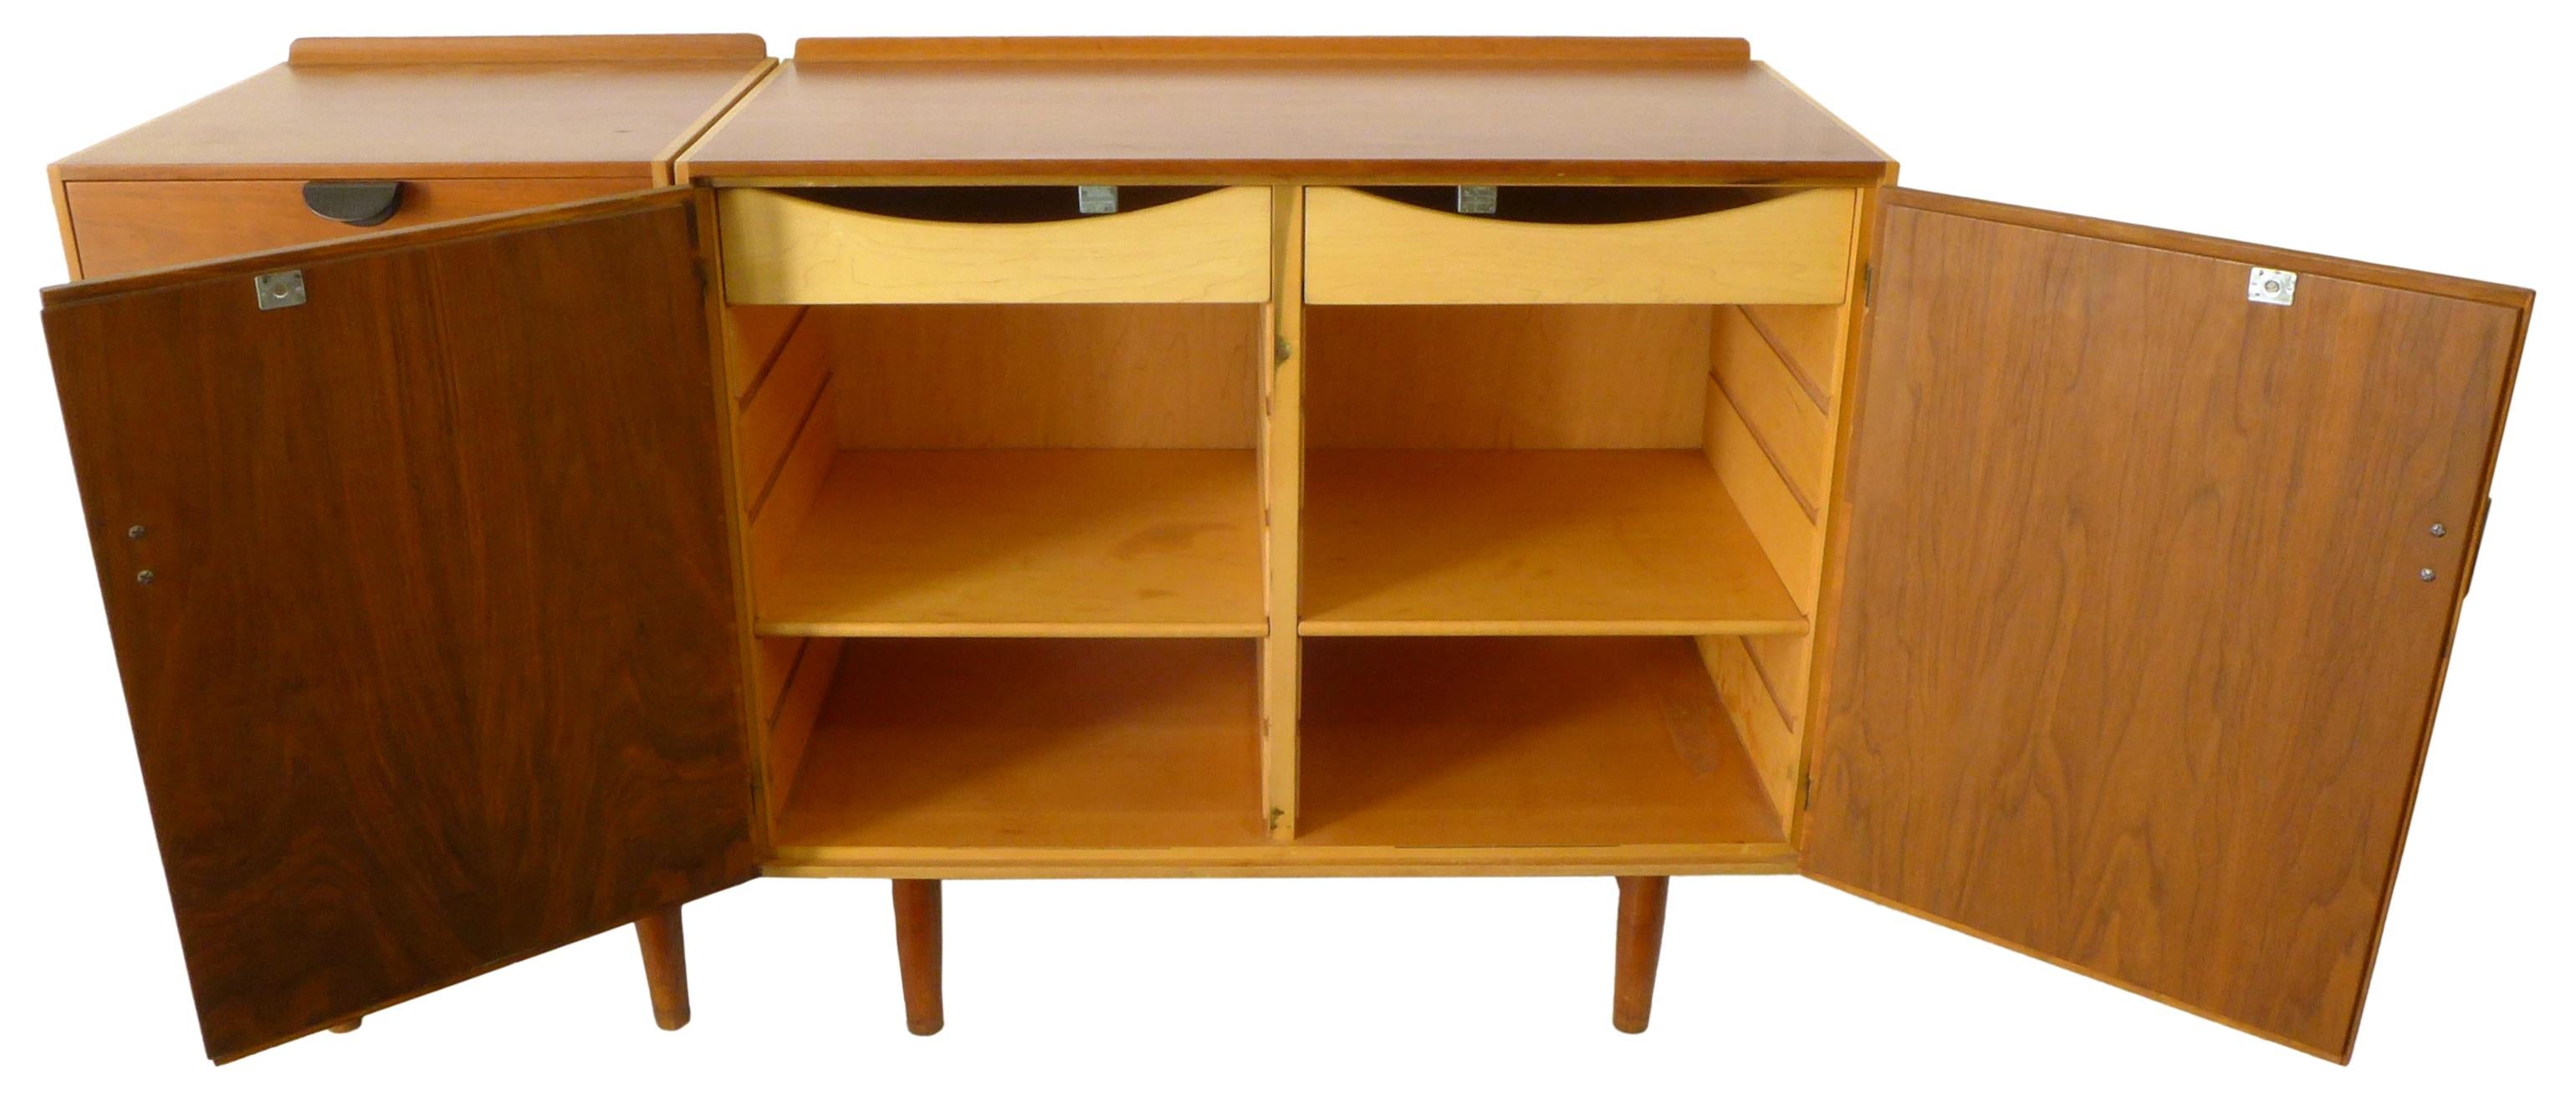 American Pair of Midcentury Cabinets by Finn Juhl for Baker For Sale